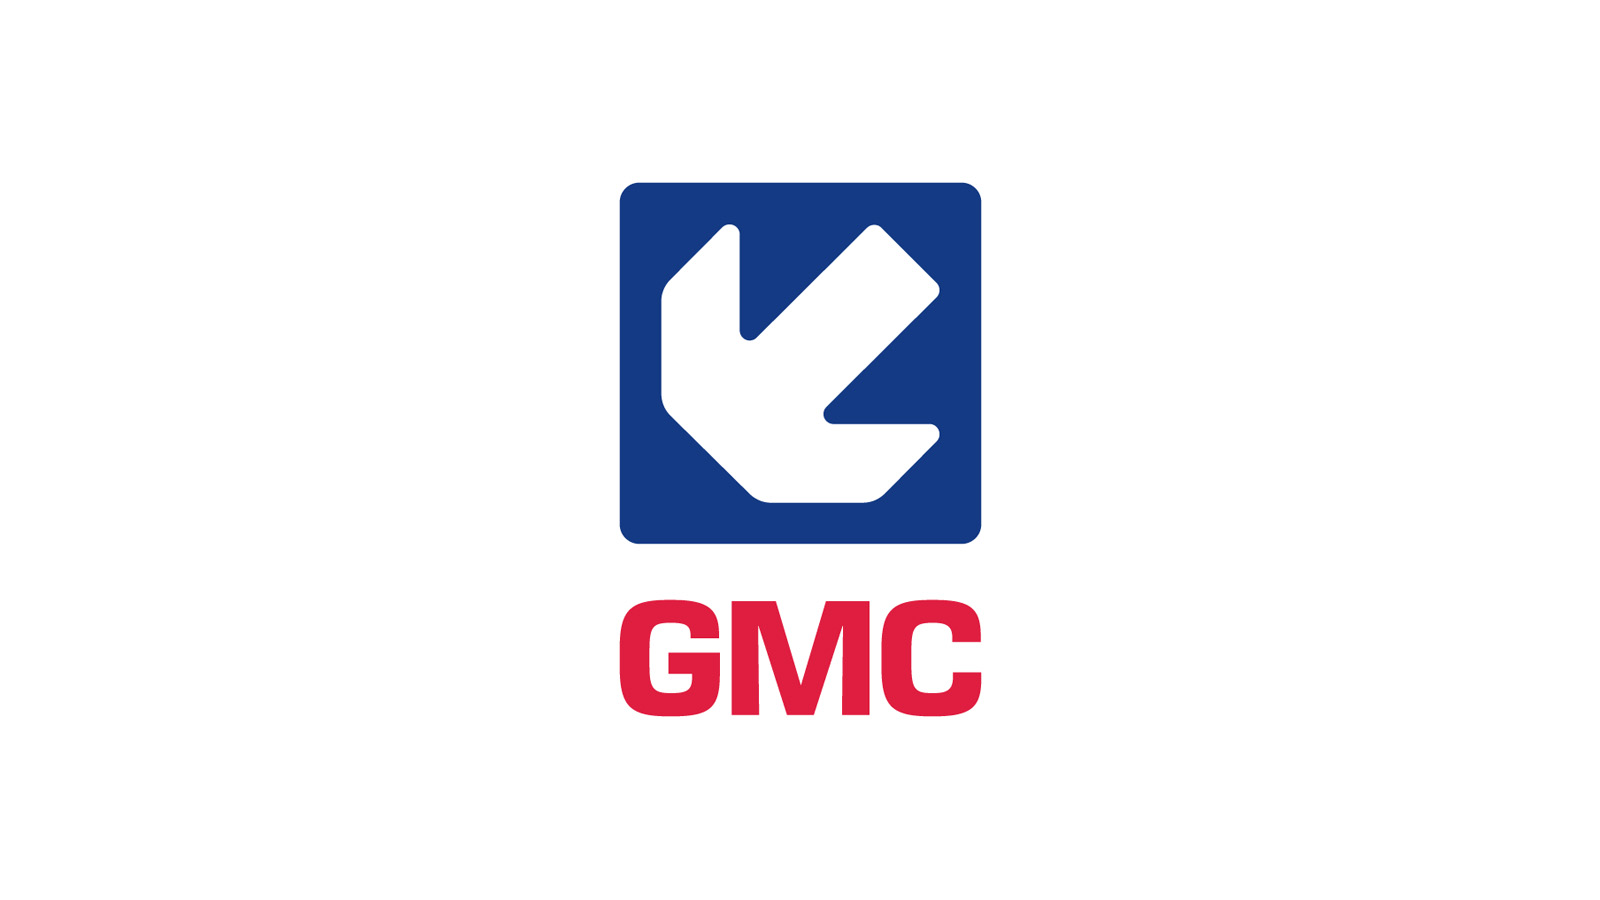 GMC POWER & AUTOMATION AS